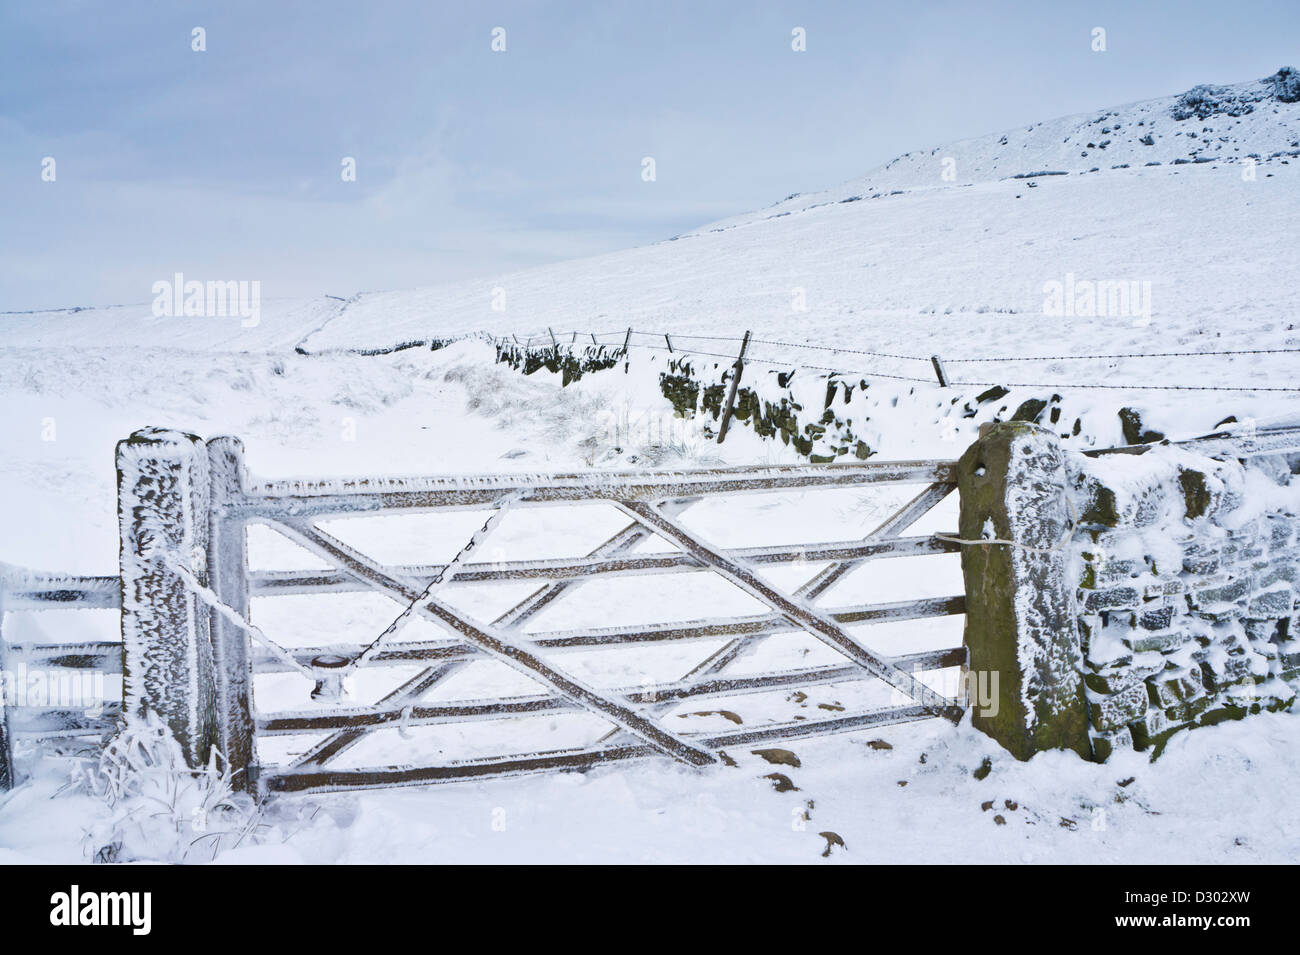 Snow  and ice covered five barred gate to a farm field Edale cross Kinder scout Derbyshire peak district England UK GB EU Europe Stock Photo